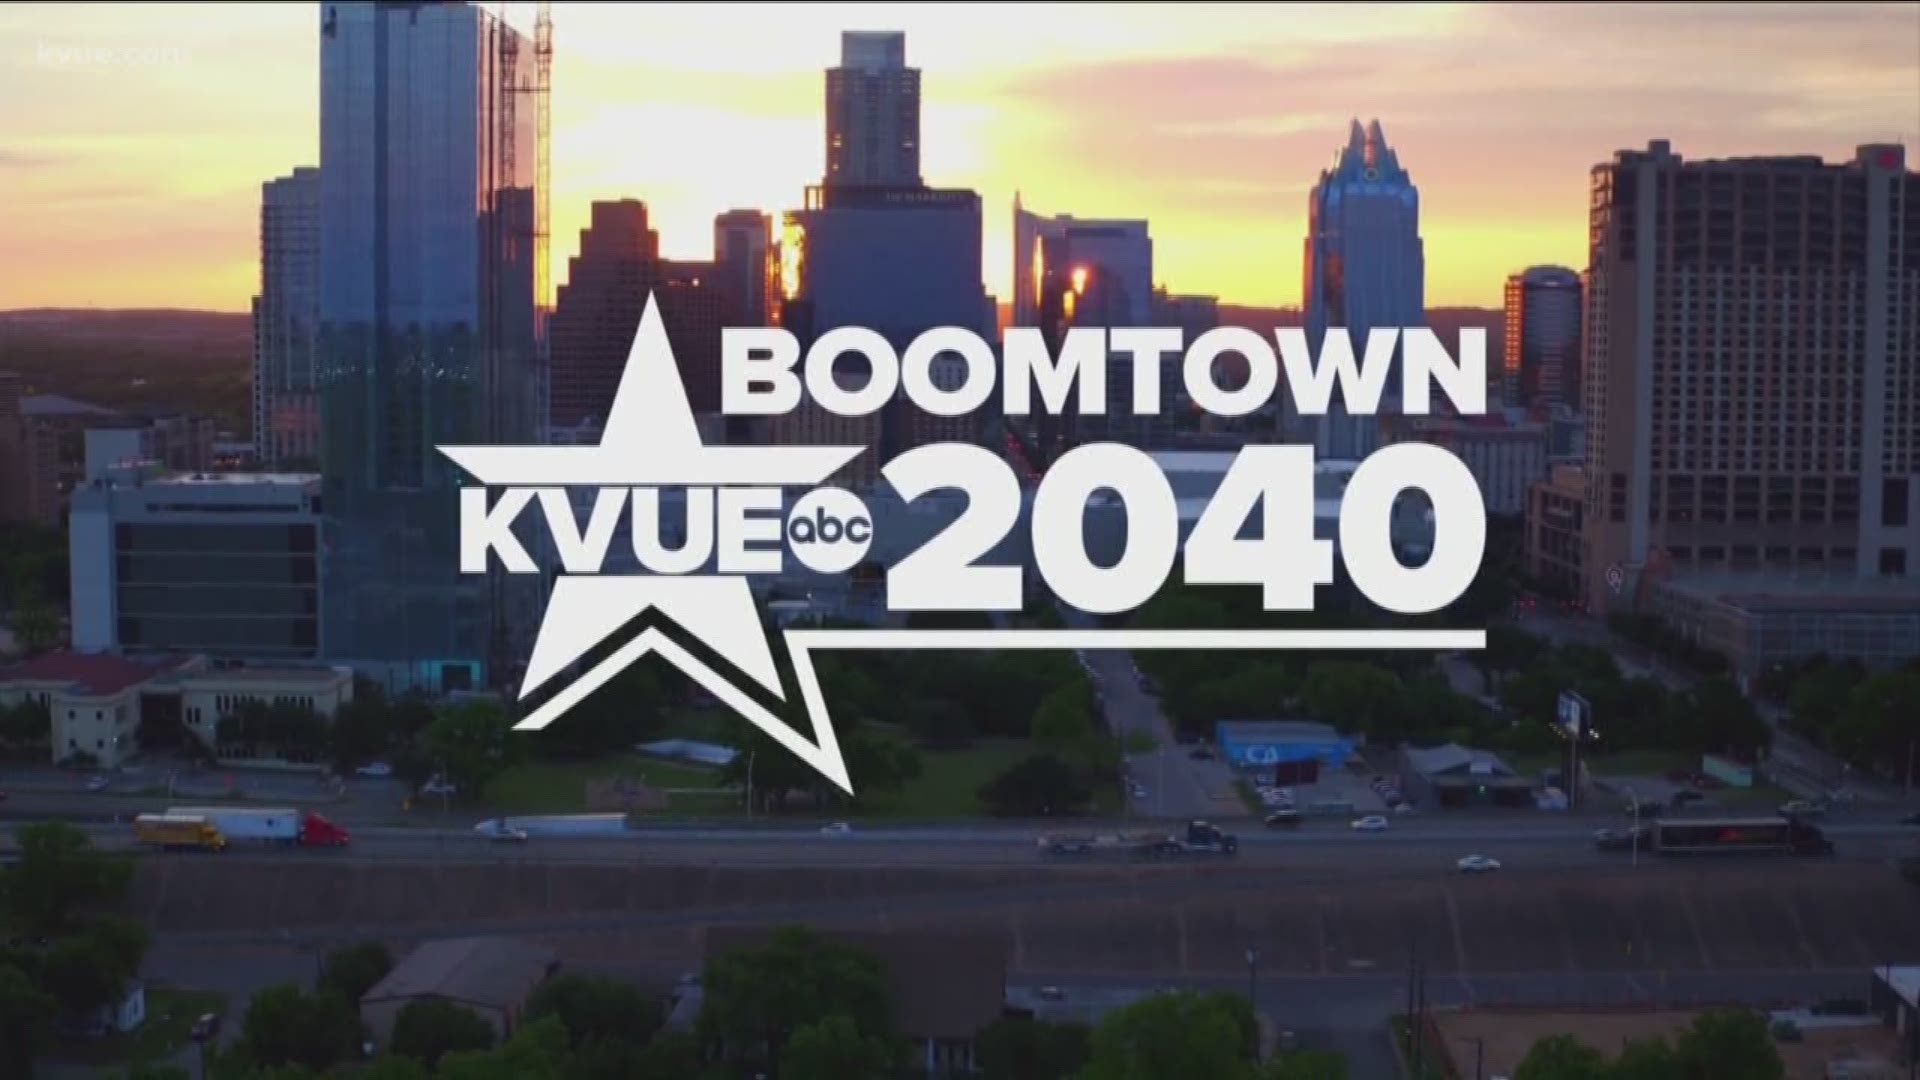 The intersection of growth and opportunity often produces something else. That's life in a Boomtown like Austin, and that's the reason we started our series of stories about Boomtown two years ago. As we move into a new year - we promise a new view of thi